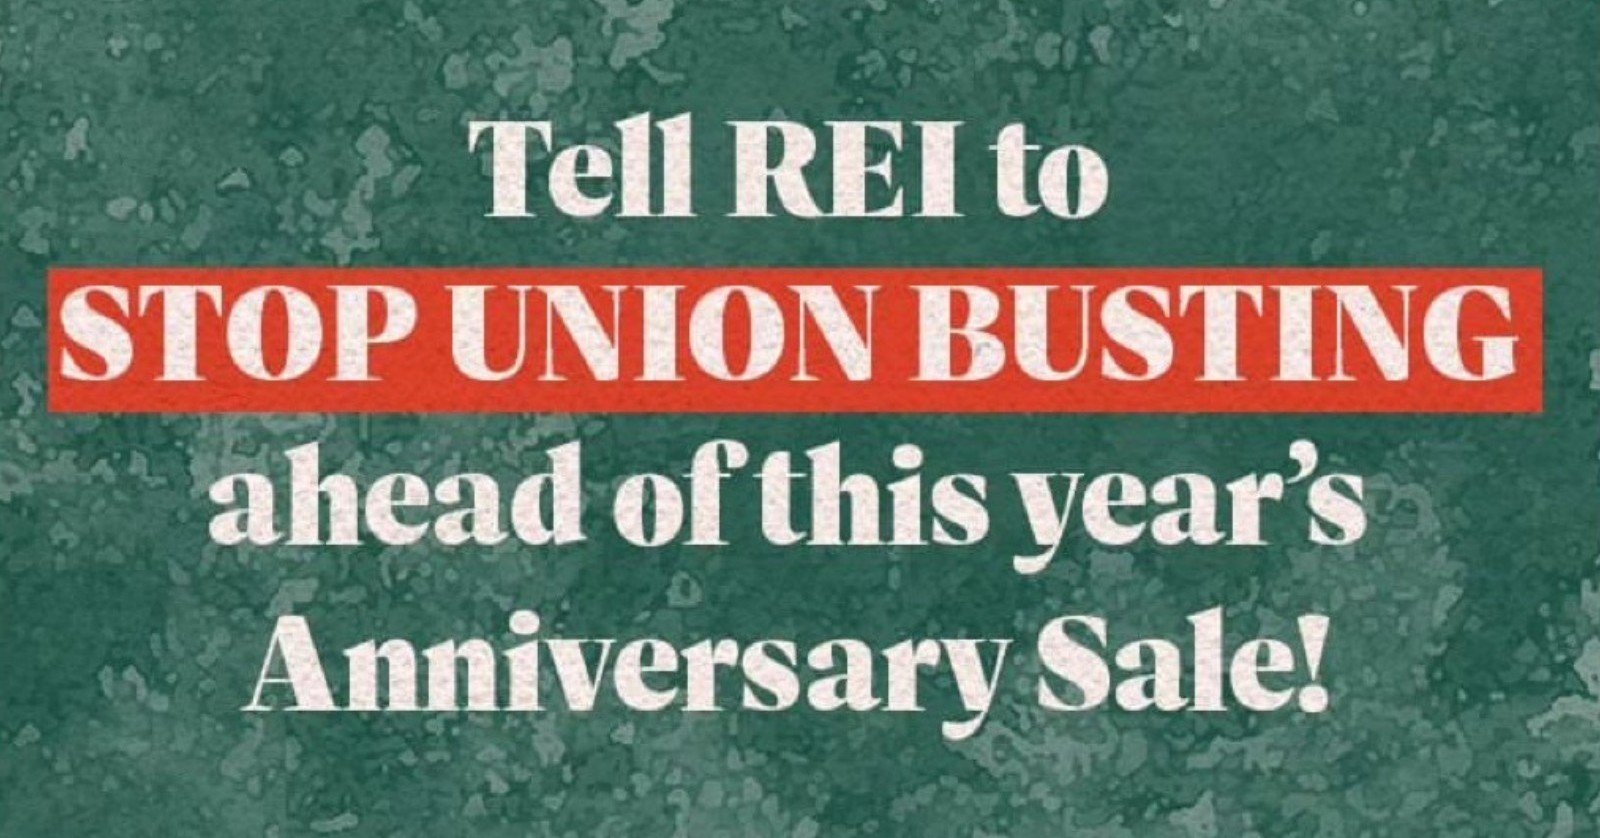 REI, stop union busting and bargain a fair contract with your workers! We&rsquo;re only days away from @rei&rsquo;s biggest sale of the year &ndash; and we&rsquo;re making sure REI hears the @reiunion loud and clear. Ahead of the REI Anniversary Sale